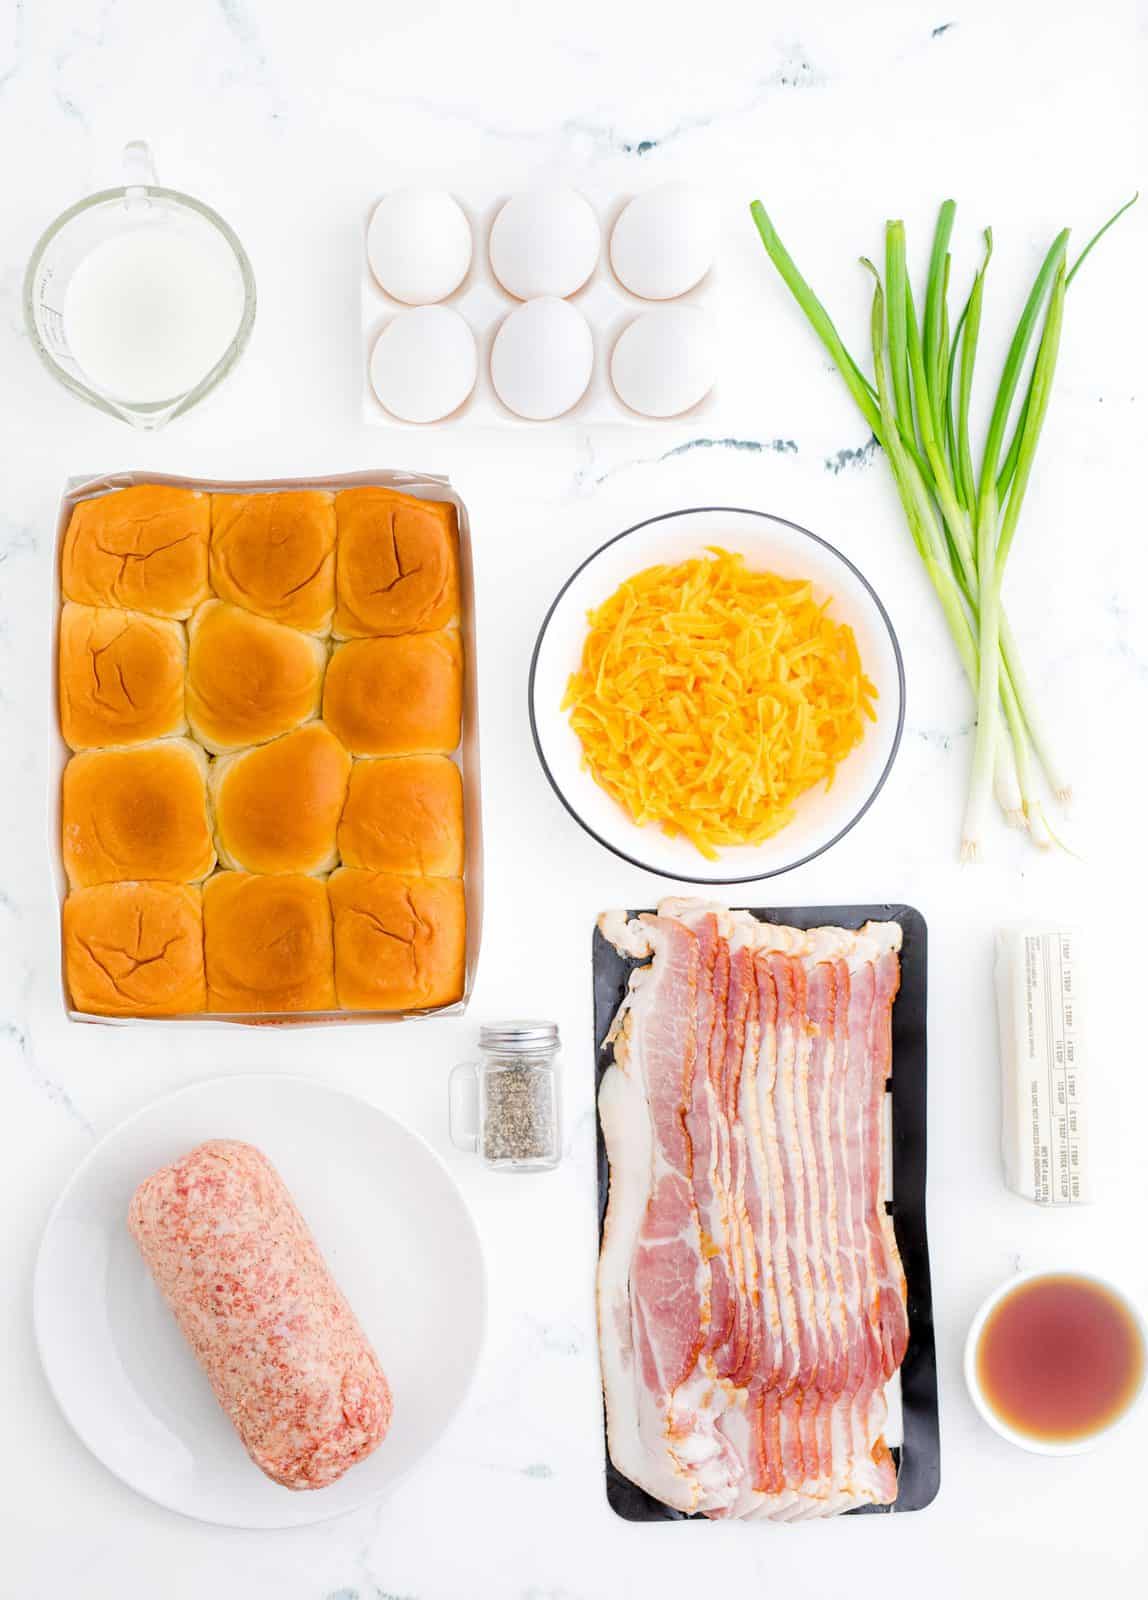 Ingredients needed for breakfast sliders: pork sausage, bacon, eggs, milk, chives, pepper, dinner rolls, shredded cheddar cheese, salted butter and maple syrup.